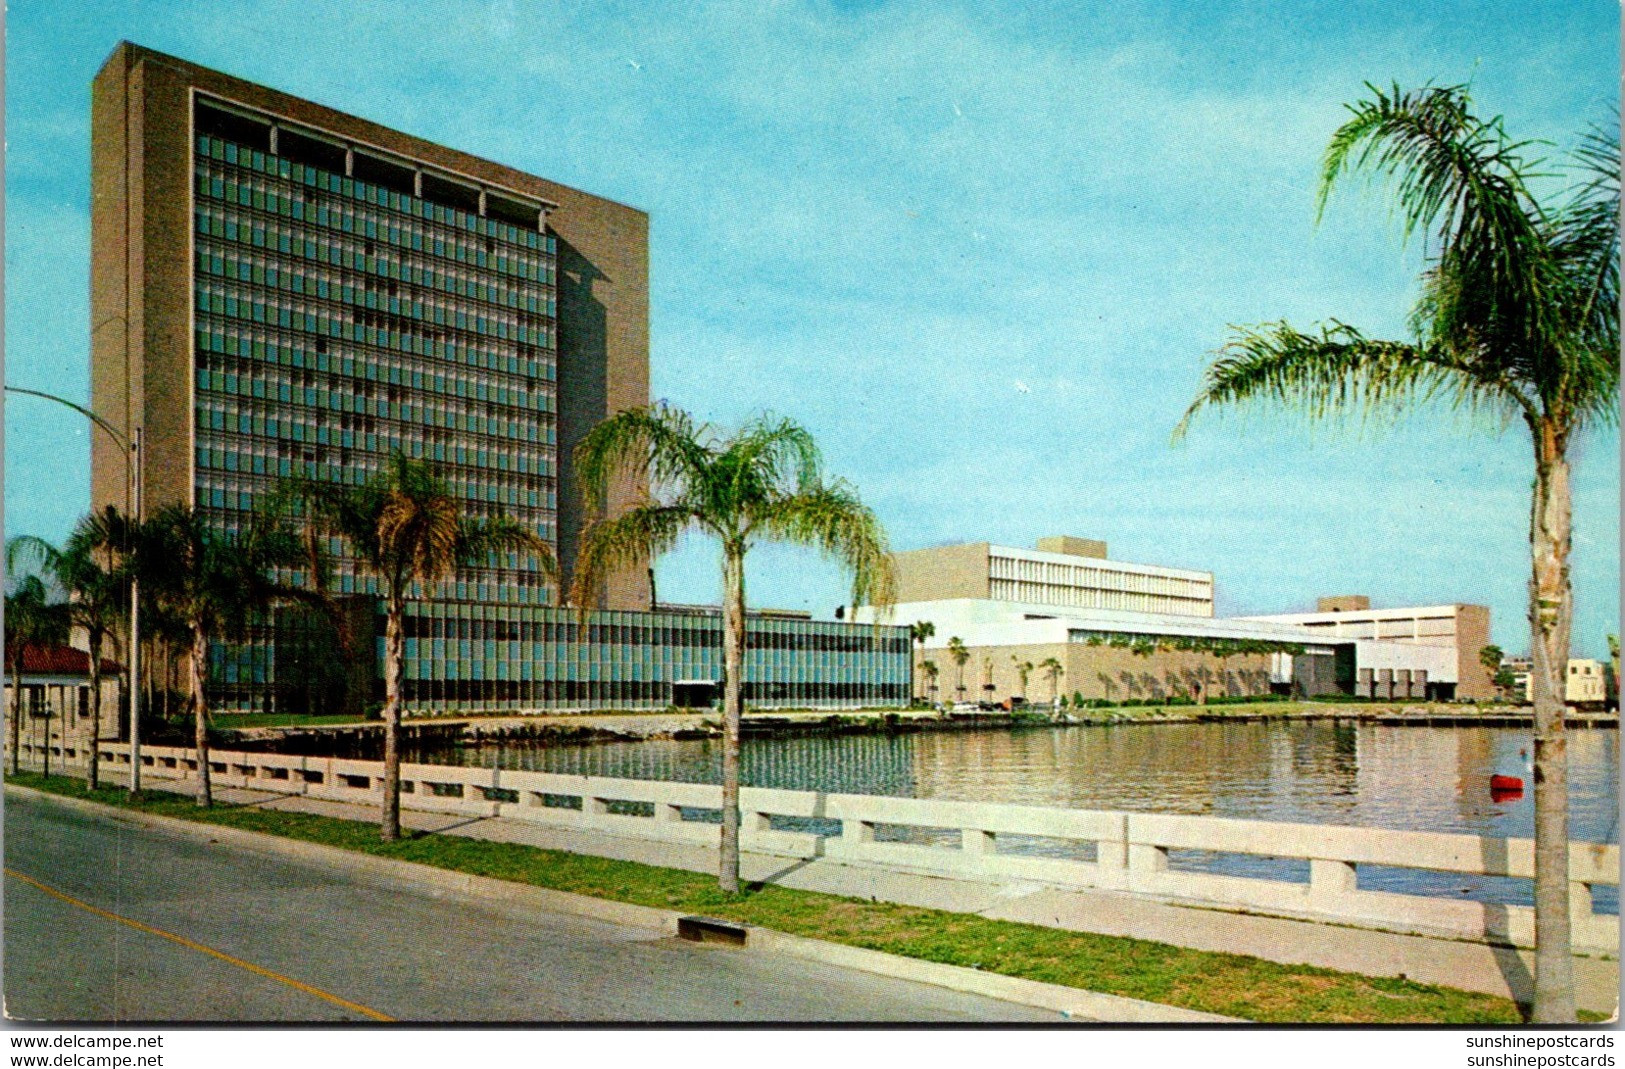 Florida Jacksonville City Hall And Duval County Court House 1979 - Jacksonville